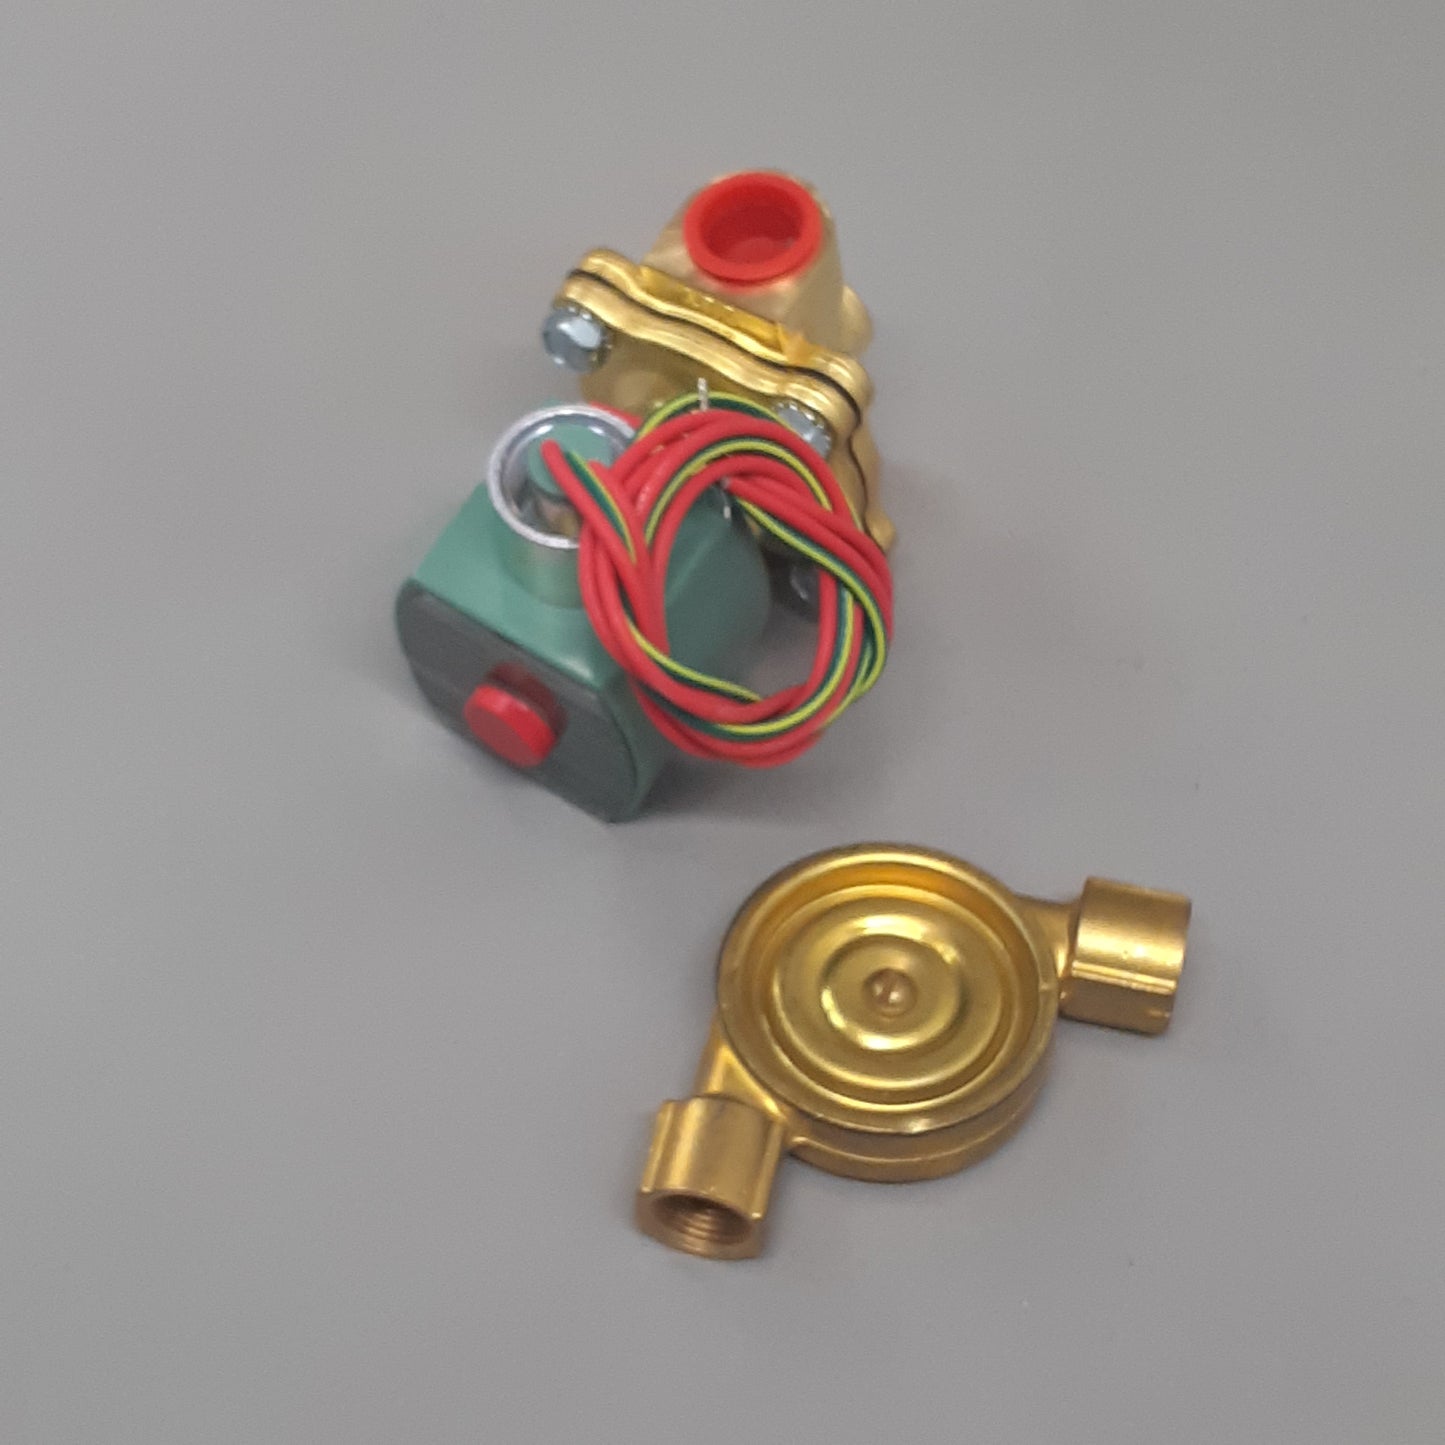 ASCO REDHAT Fuel Gas Solenoid Valve: 1/2 in Pipe Size, 50 psi Max. Op Pressure Differential Air/Inert Gas (New)